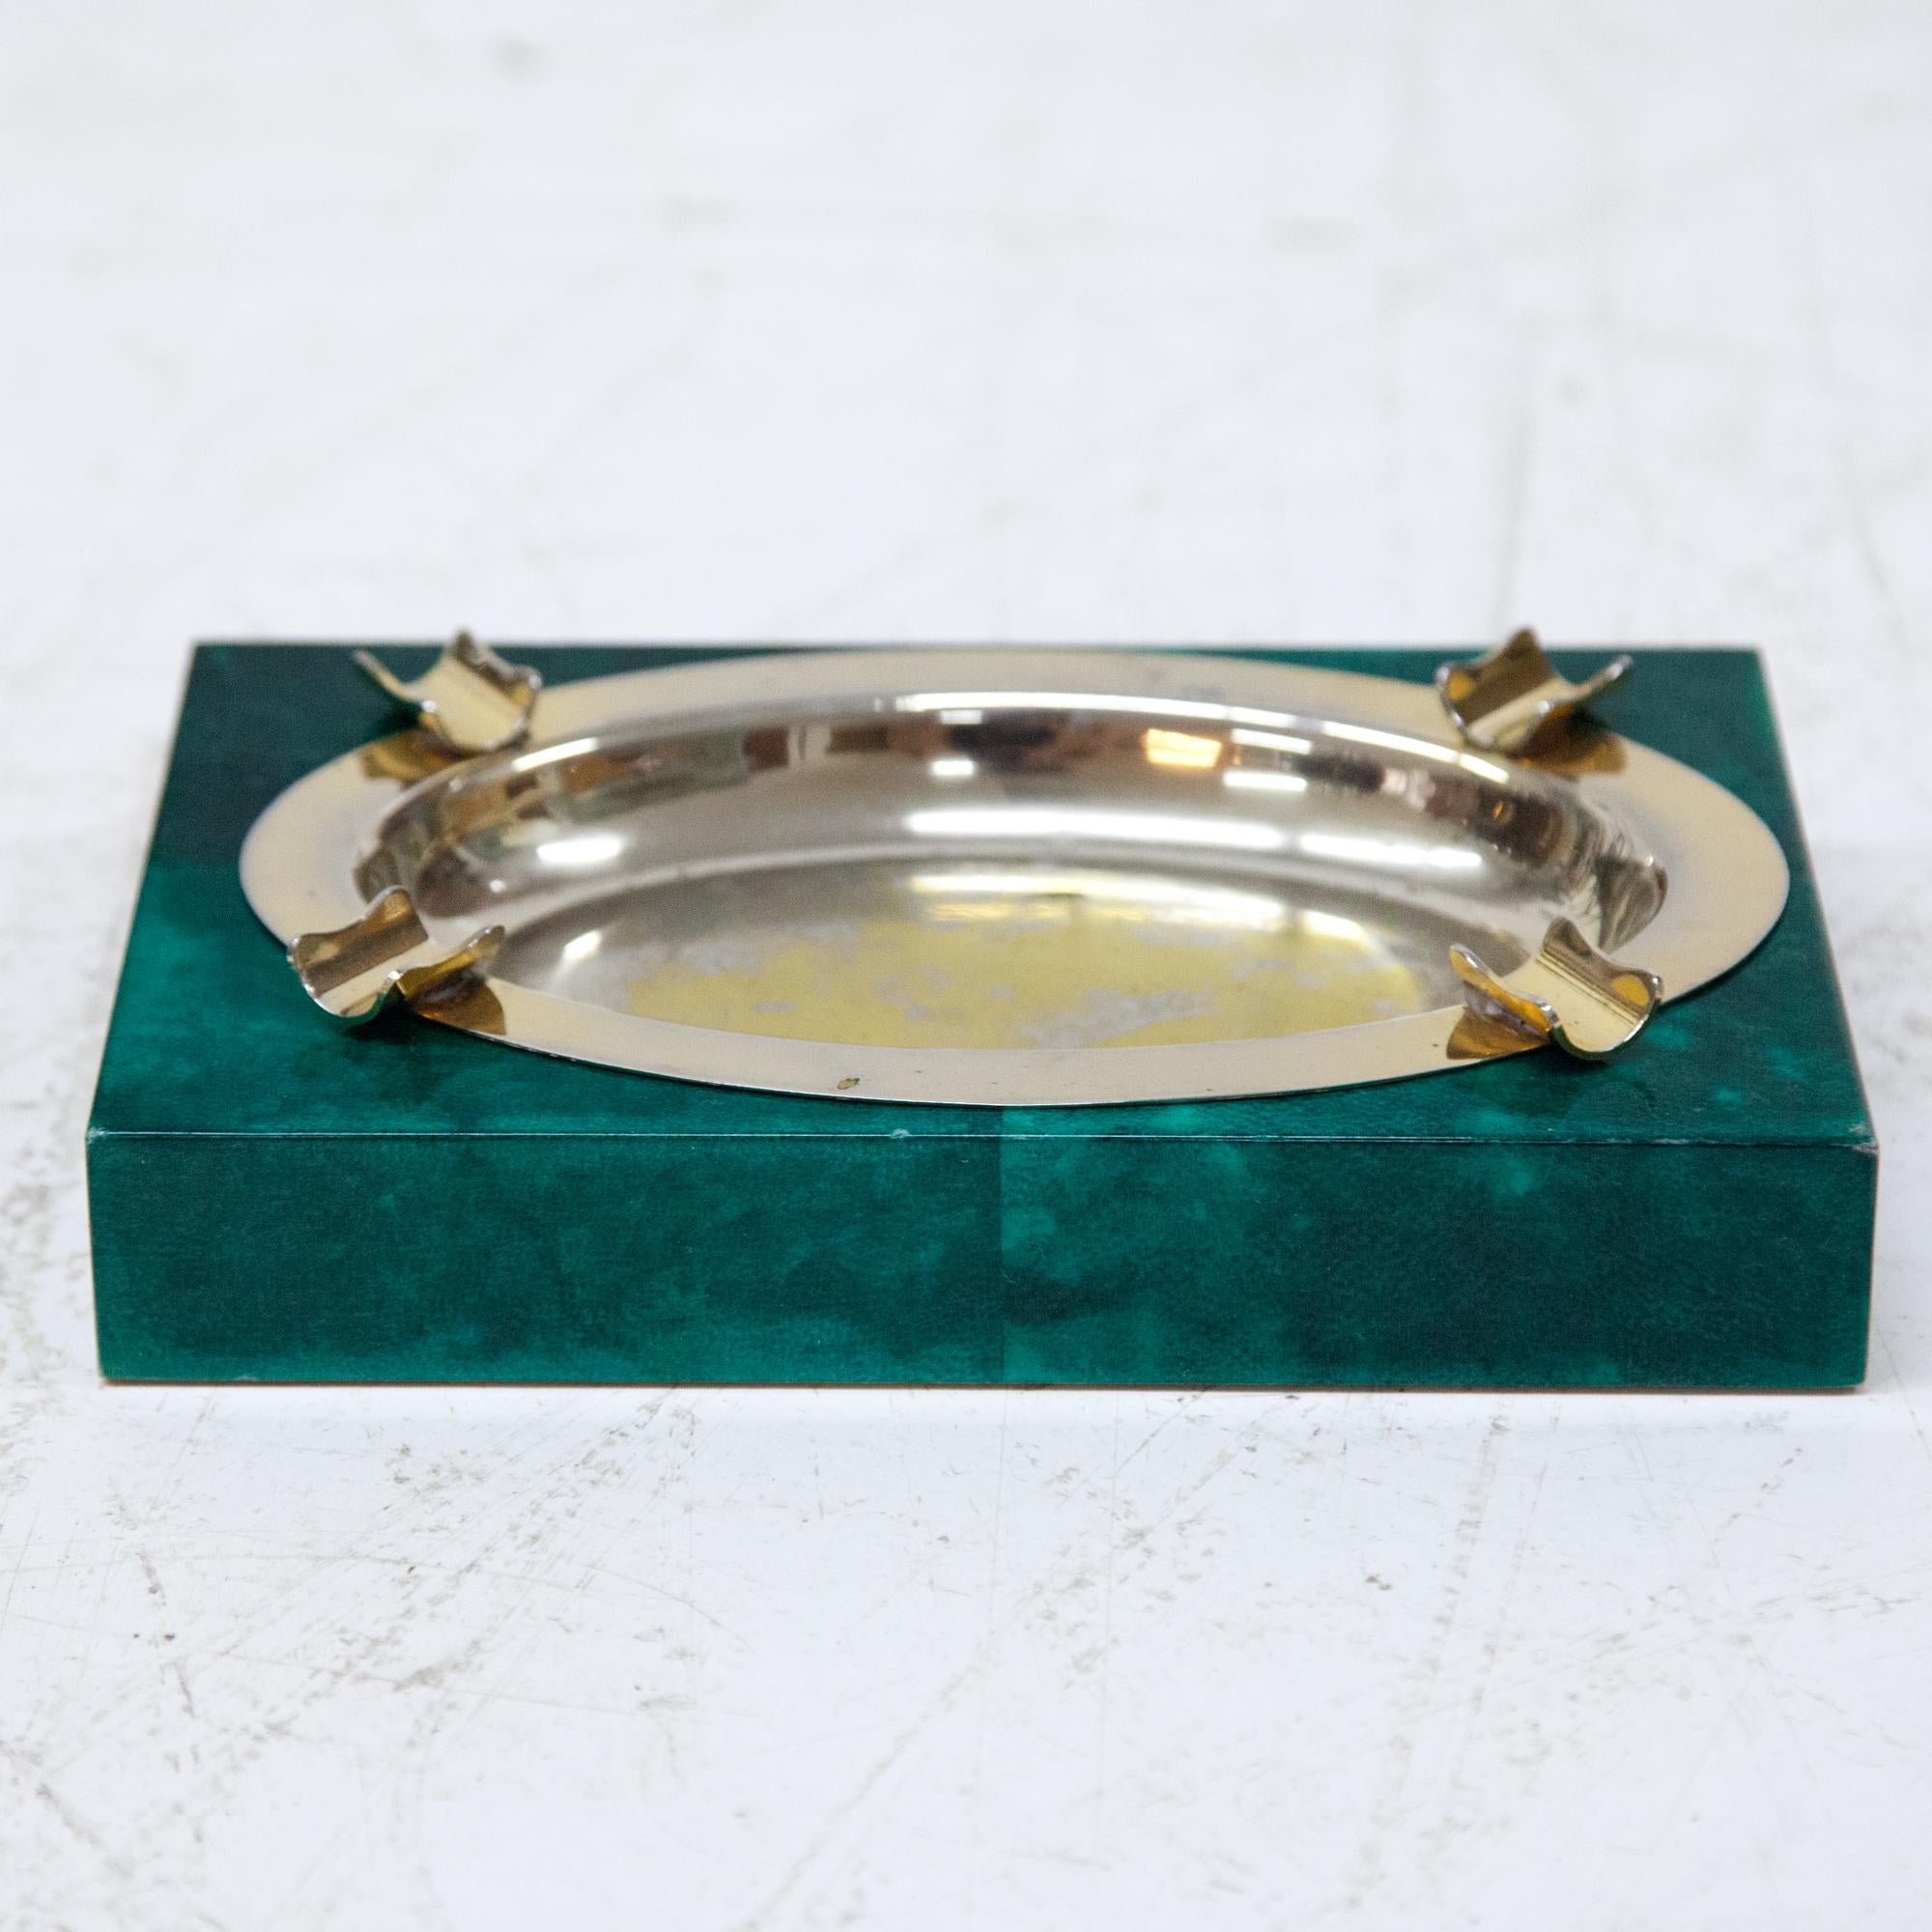 Rectangular ashtray in green covered with goatskin and clear varnish. Brass-plated insert.
 